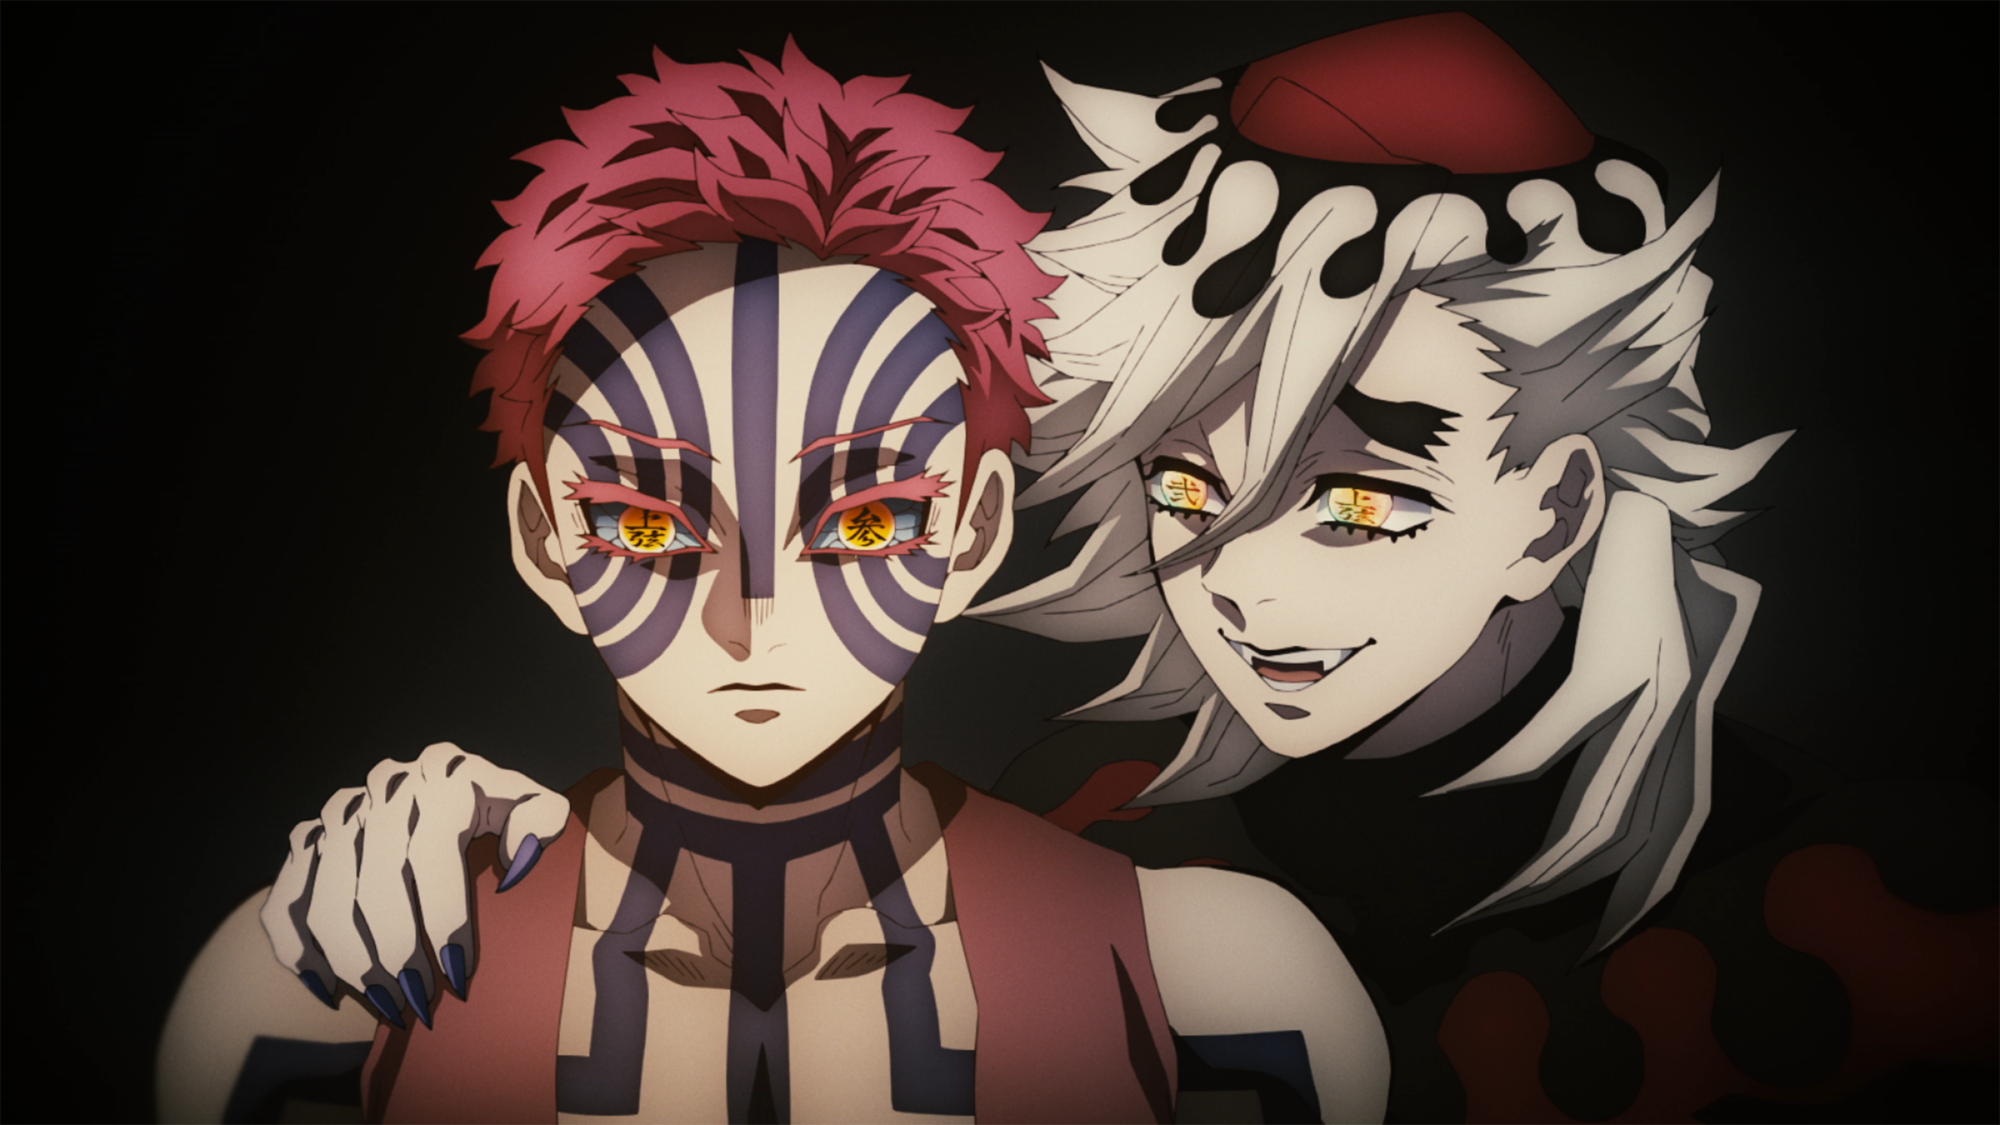 Demon Slayer: Kimetsu no Yaiba (English) on X: Just one more night until a  new episode of Demon Slayer: Kimetsu no Yaiba Swordsmith Village Arc starts  streaming on @Crunchyroll! Who's ready? 🙋‍♀️